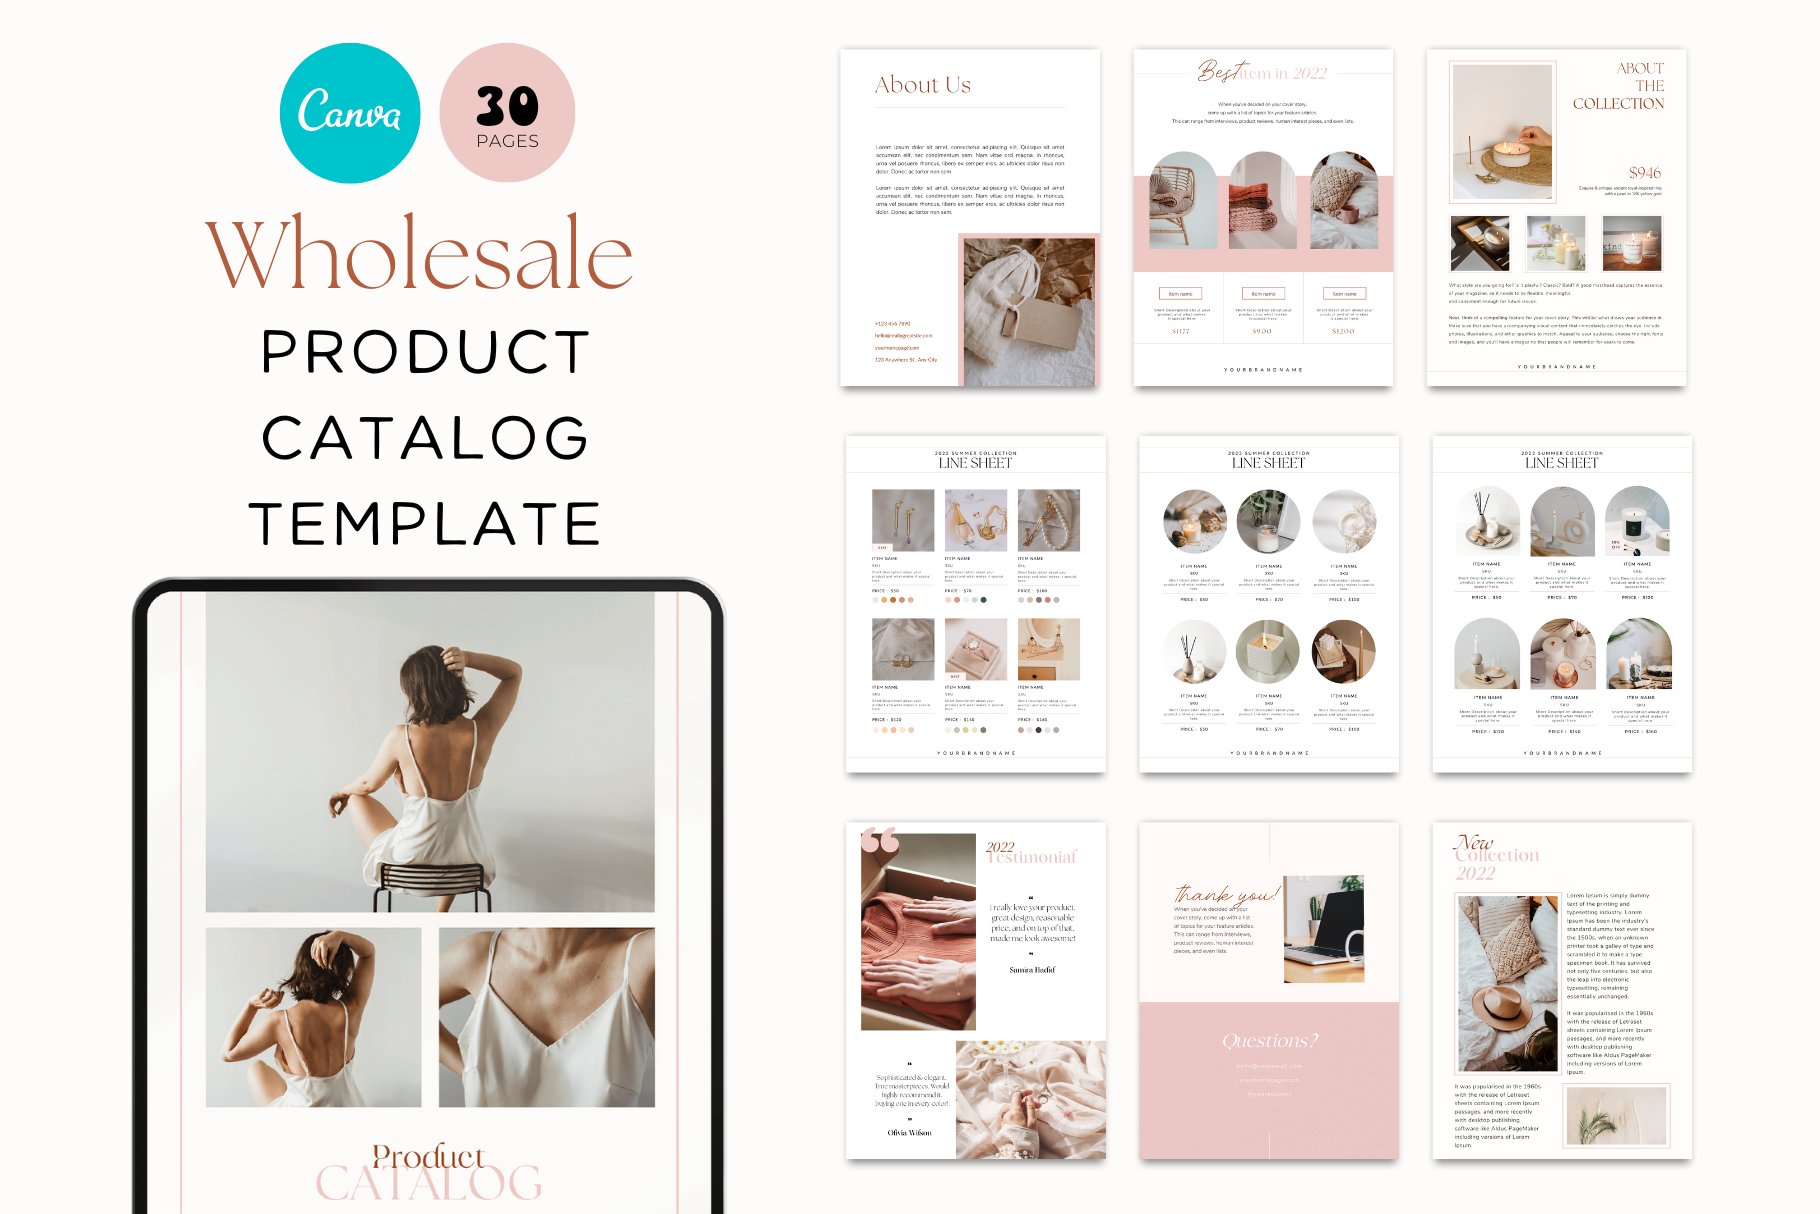 Wholesale Product Catalog for Canva cover image.